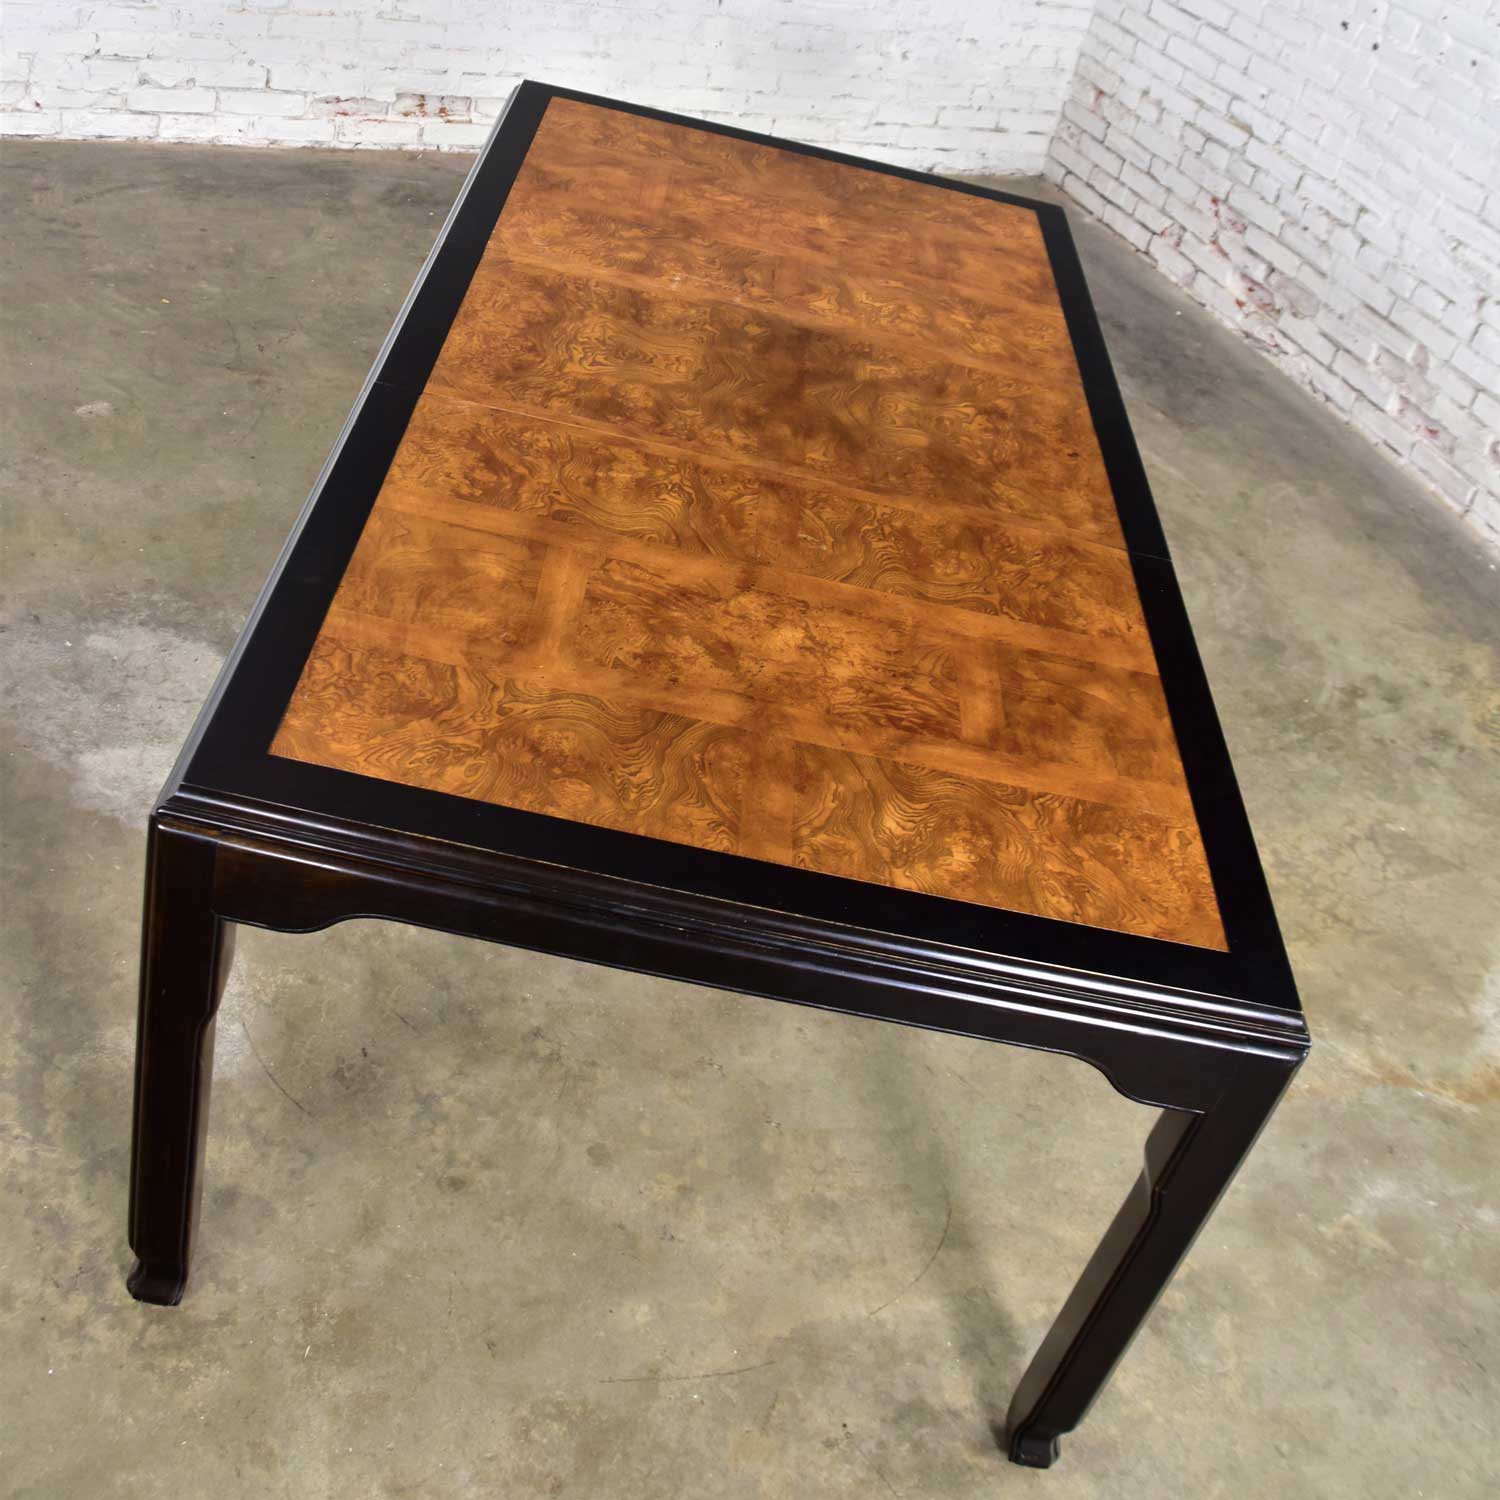 Vintage Chinoiserie Hollywood Regency Chin Hua Dining Table by Raymond K. Sobota for Century Furniture